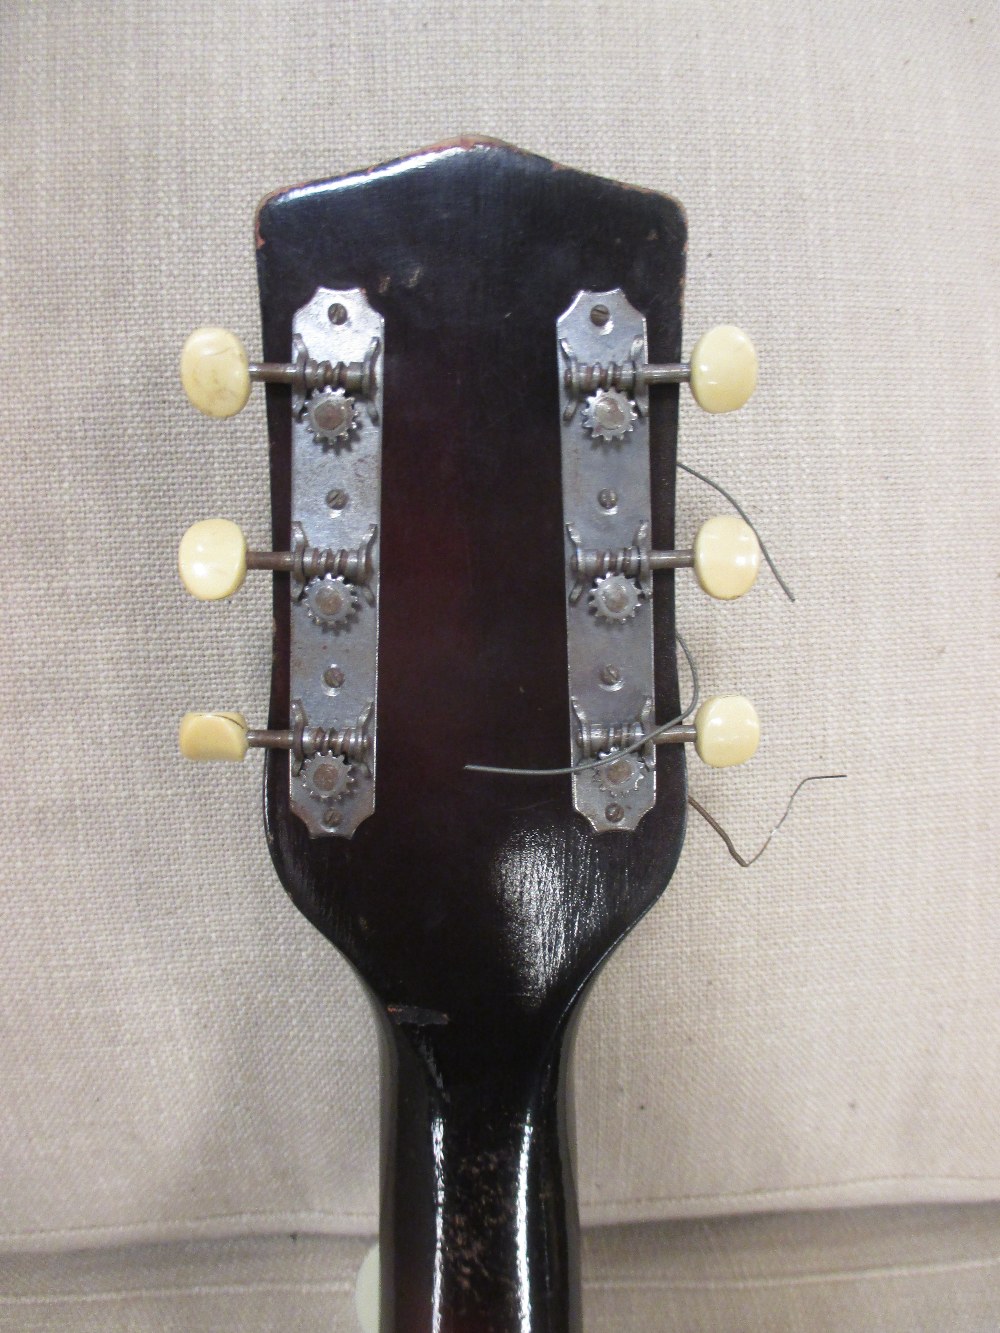 A Broadway Harmony H954 acoustic guitar, arched top model with sunburst effect and case - Image 5 of 6